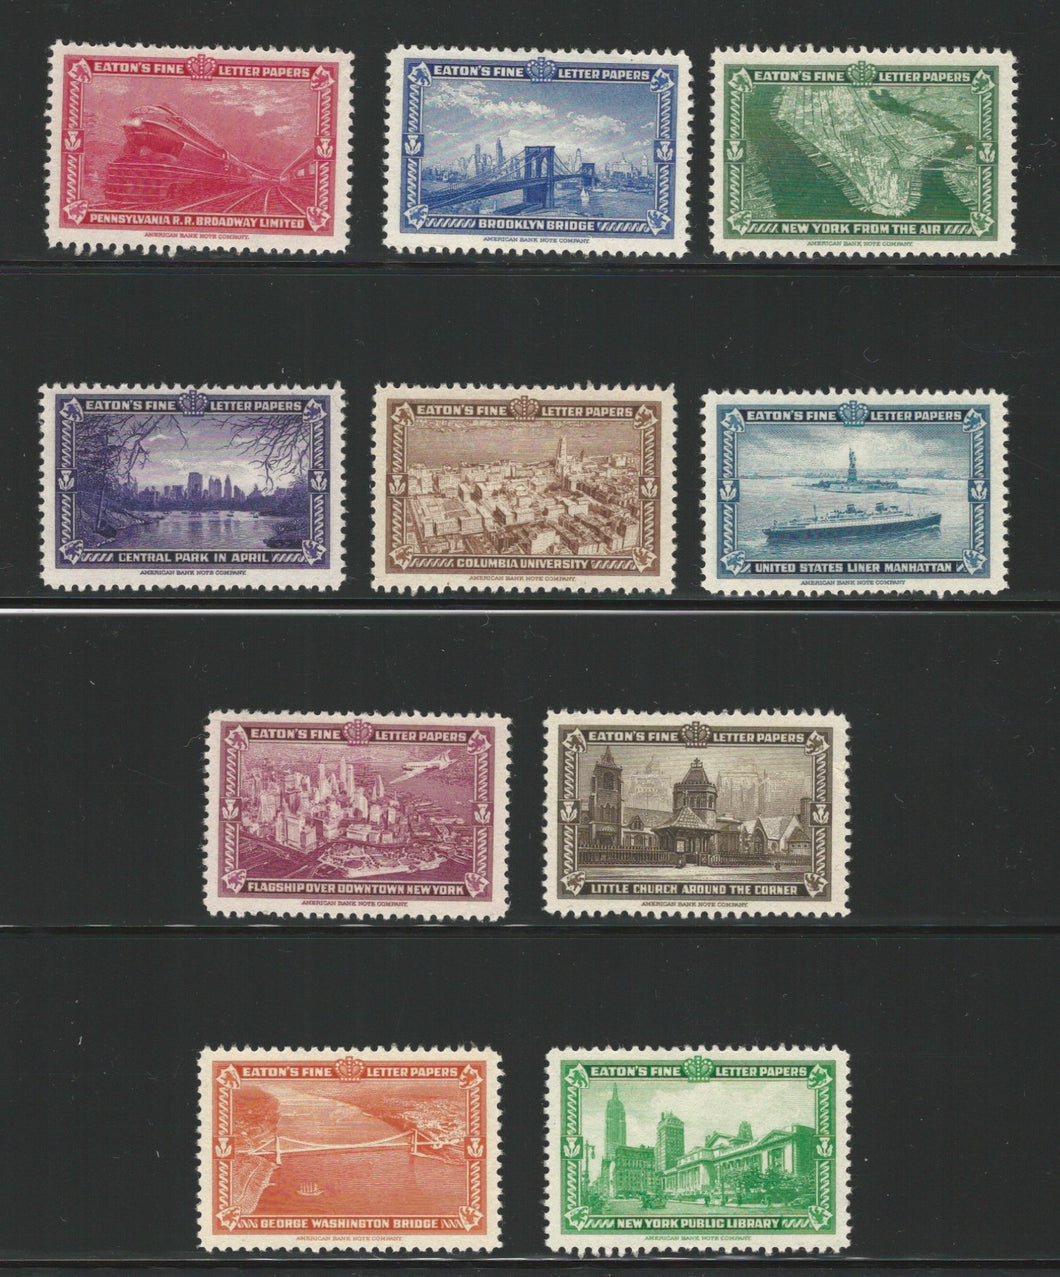 New York City Scenes, Set of 10 Eaton's Fine Letter Papers, 1939 Poster Stamps